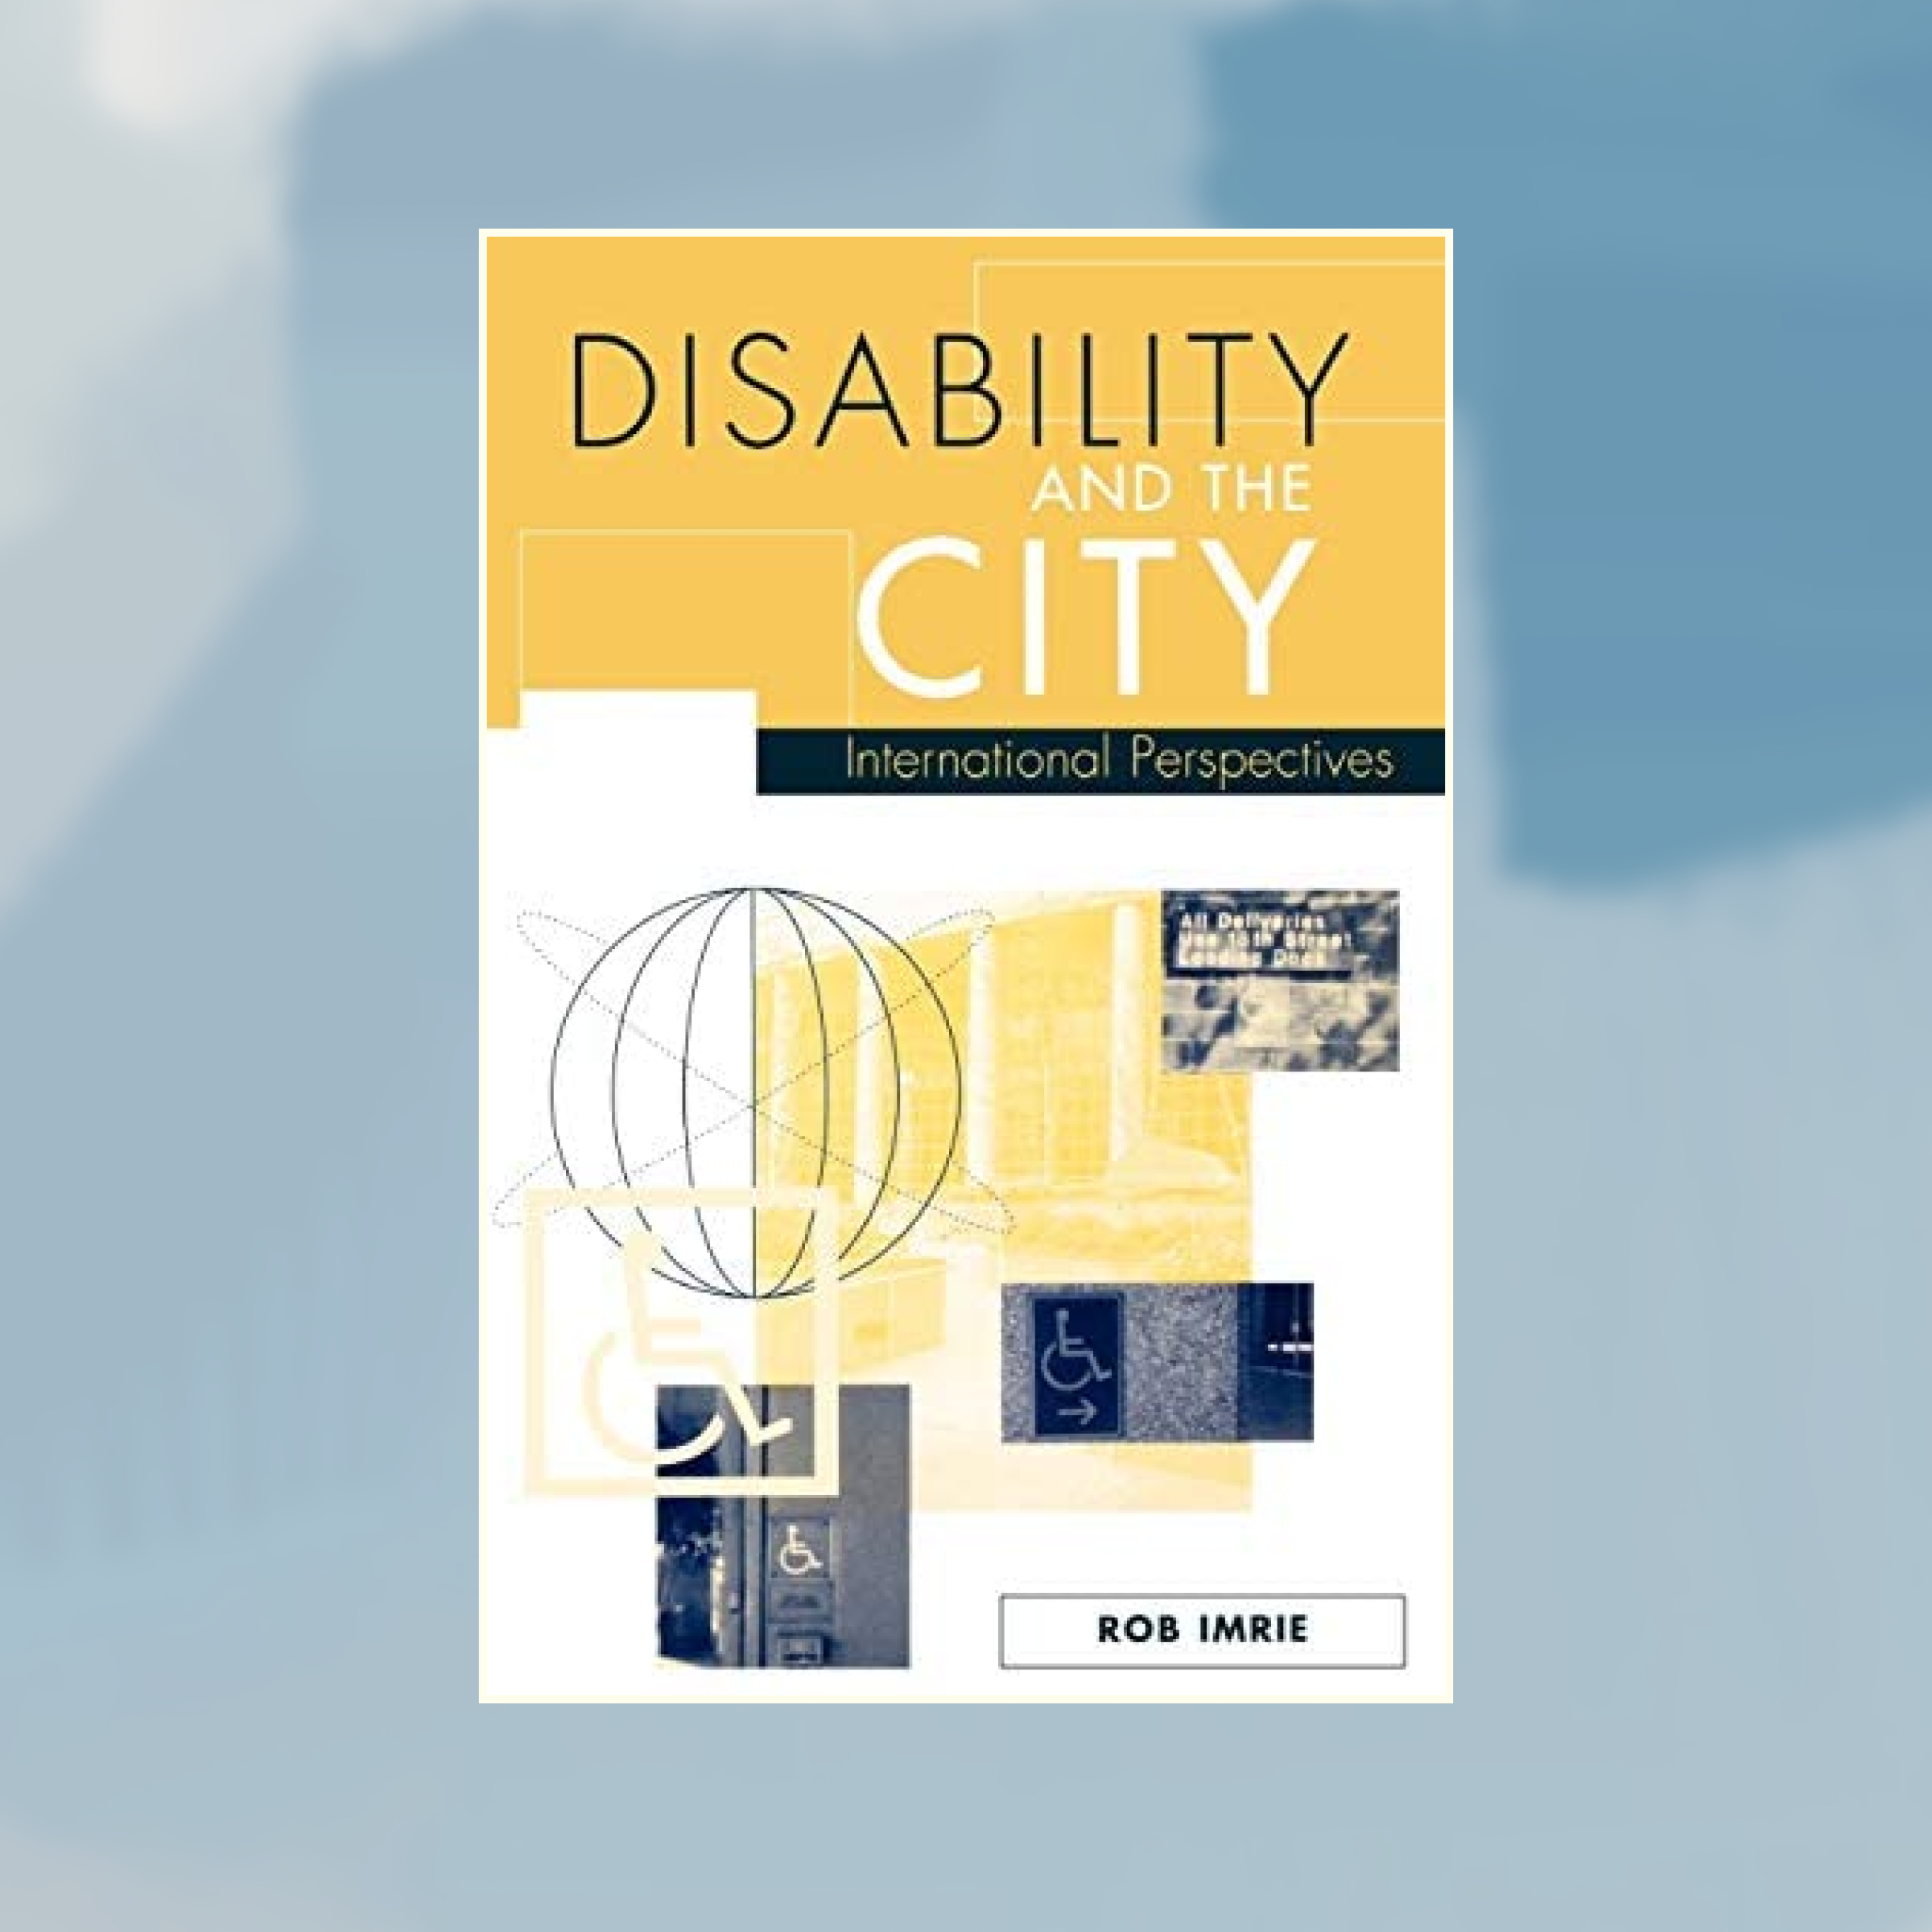 Book cover of Disability and the City against an abstract painted background